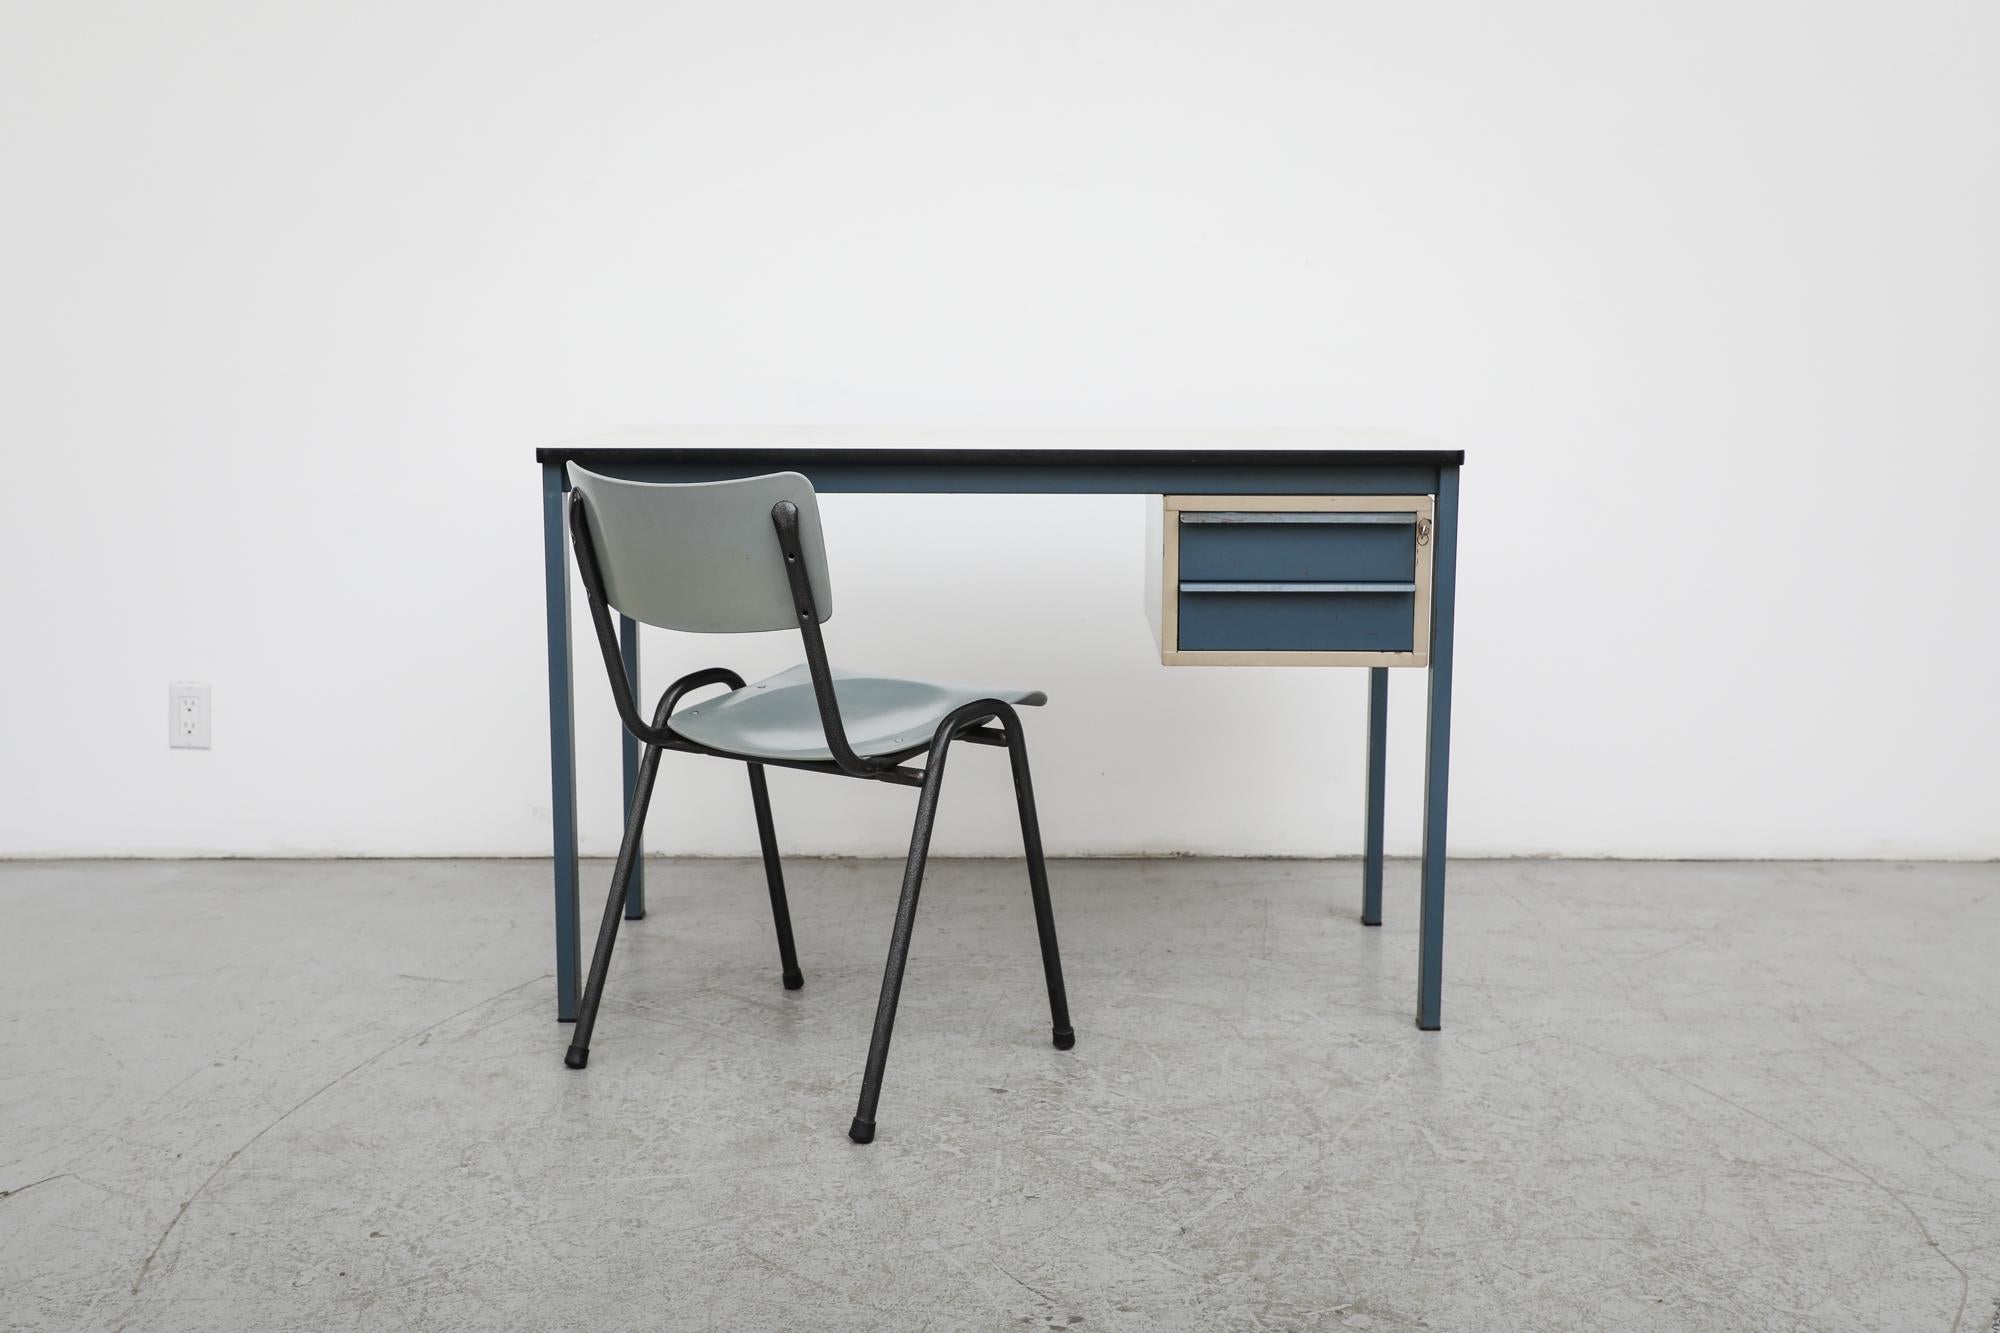 Duotone Ahrend De Cirkel metal desk. The desk has a formica top, blue legs and one side cabinet with two blue drawers. In original condition with visible wear, rust, dents and scratches. Wear is consistent with its age and use.